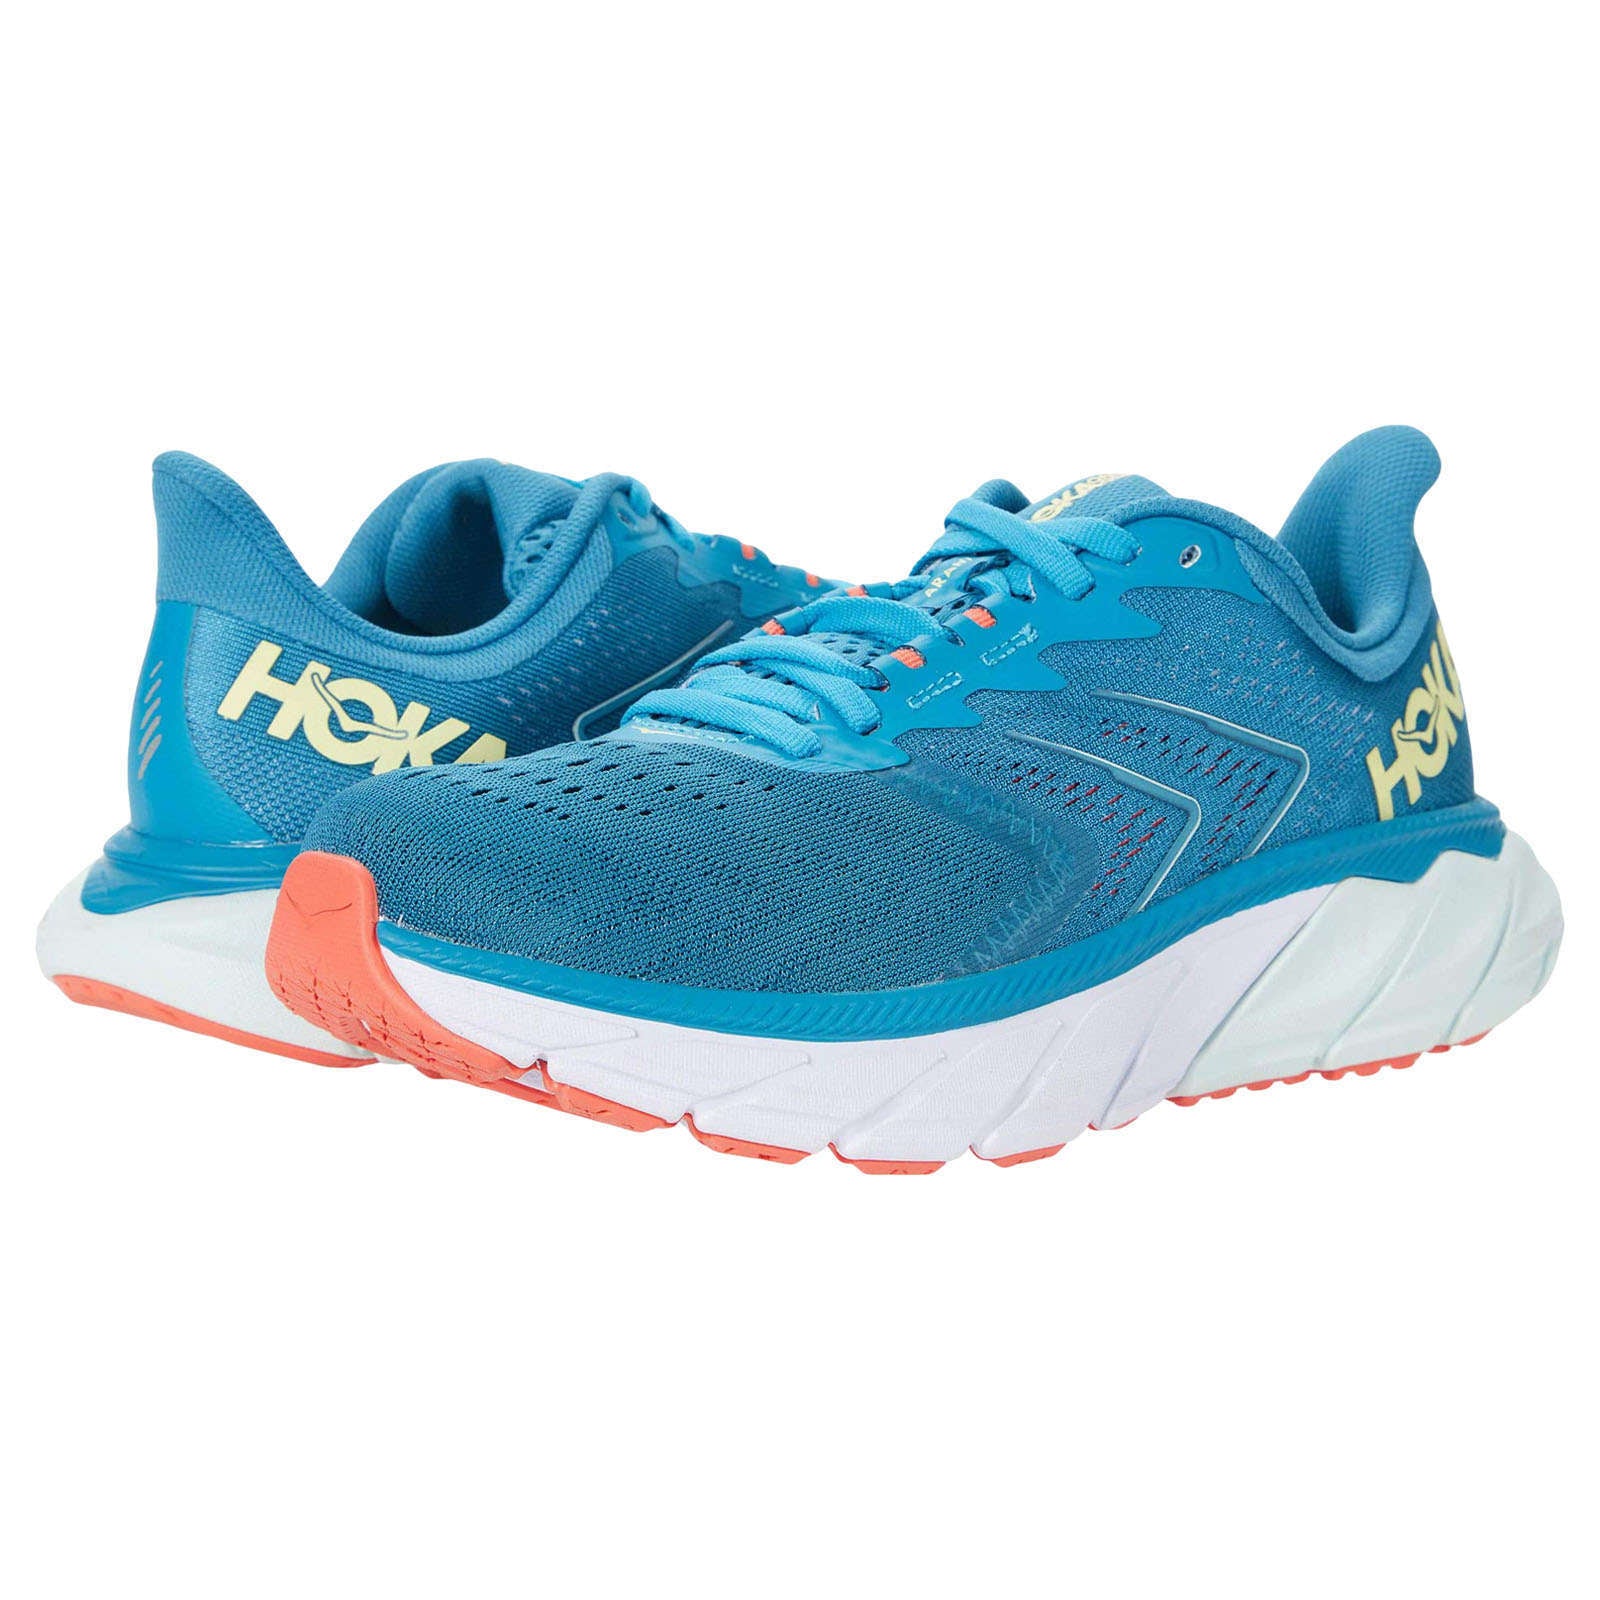 Hoka One One Arahi 5 Synthetic Textile Women's Low-Top Road Running Trainers#color_mosaic blue luminary green